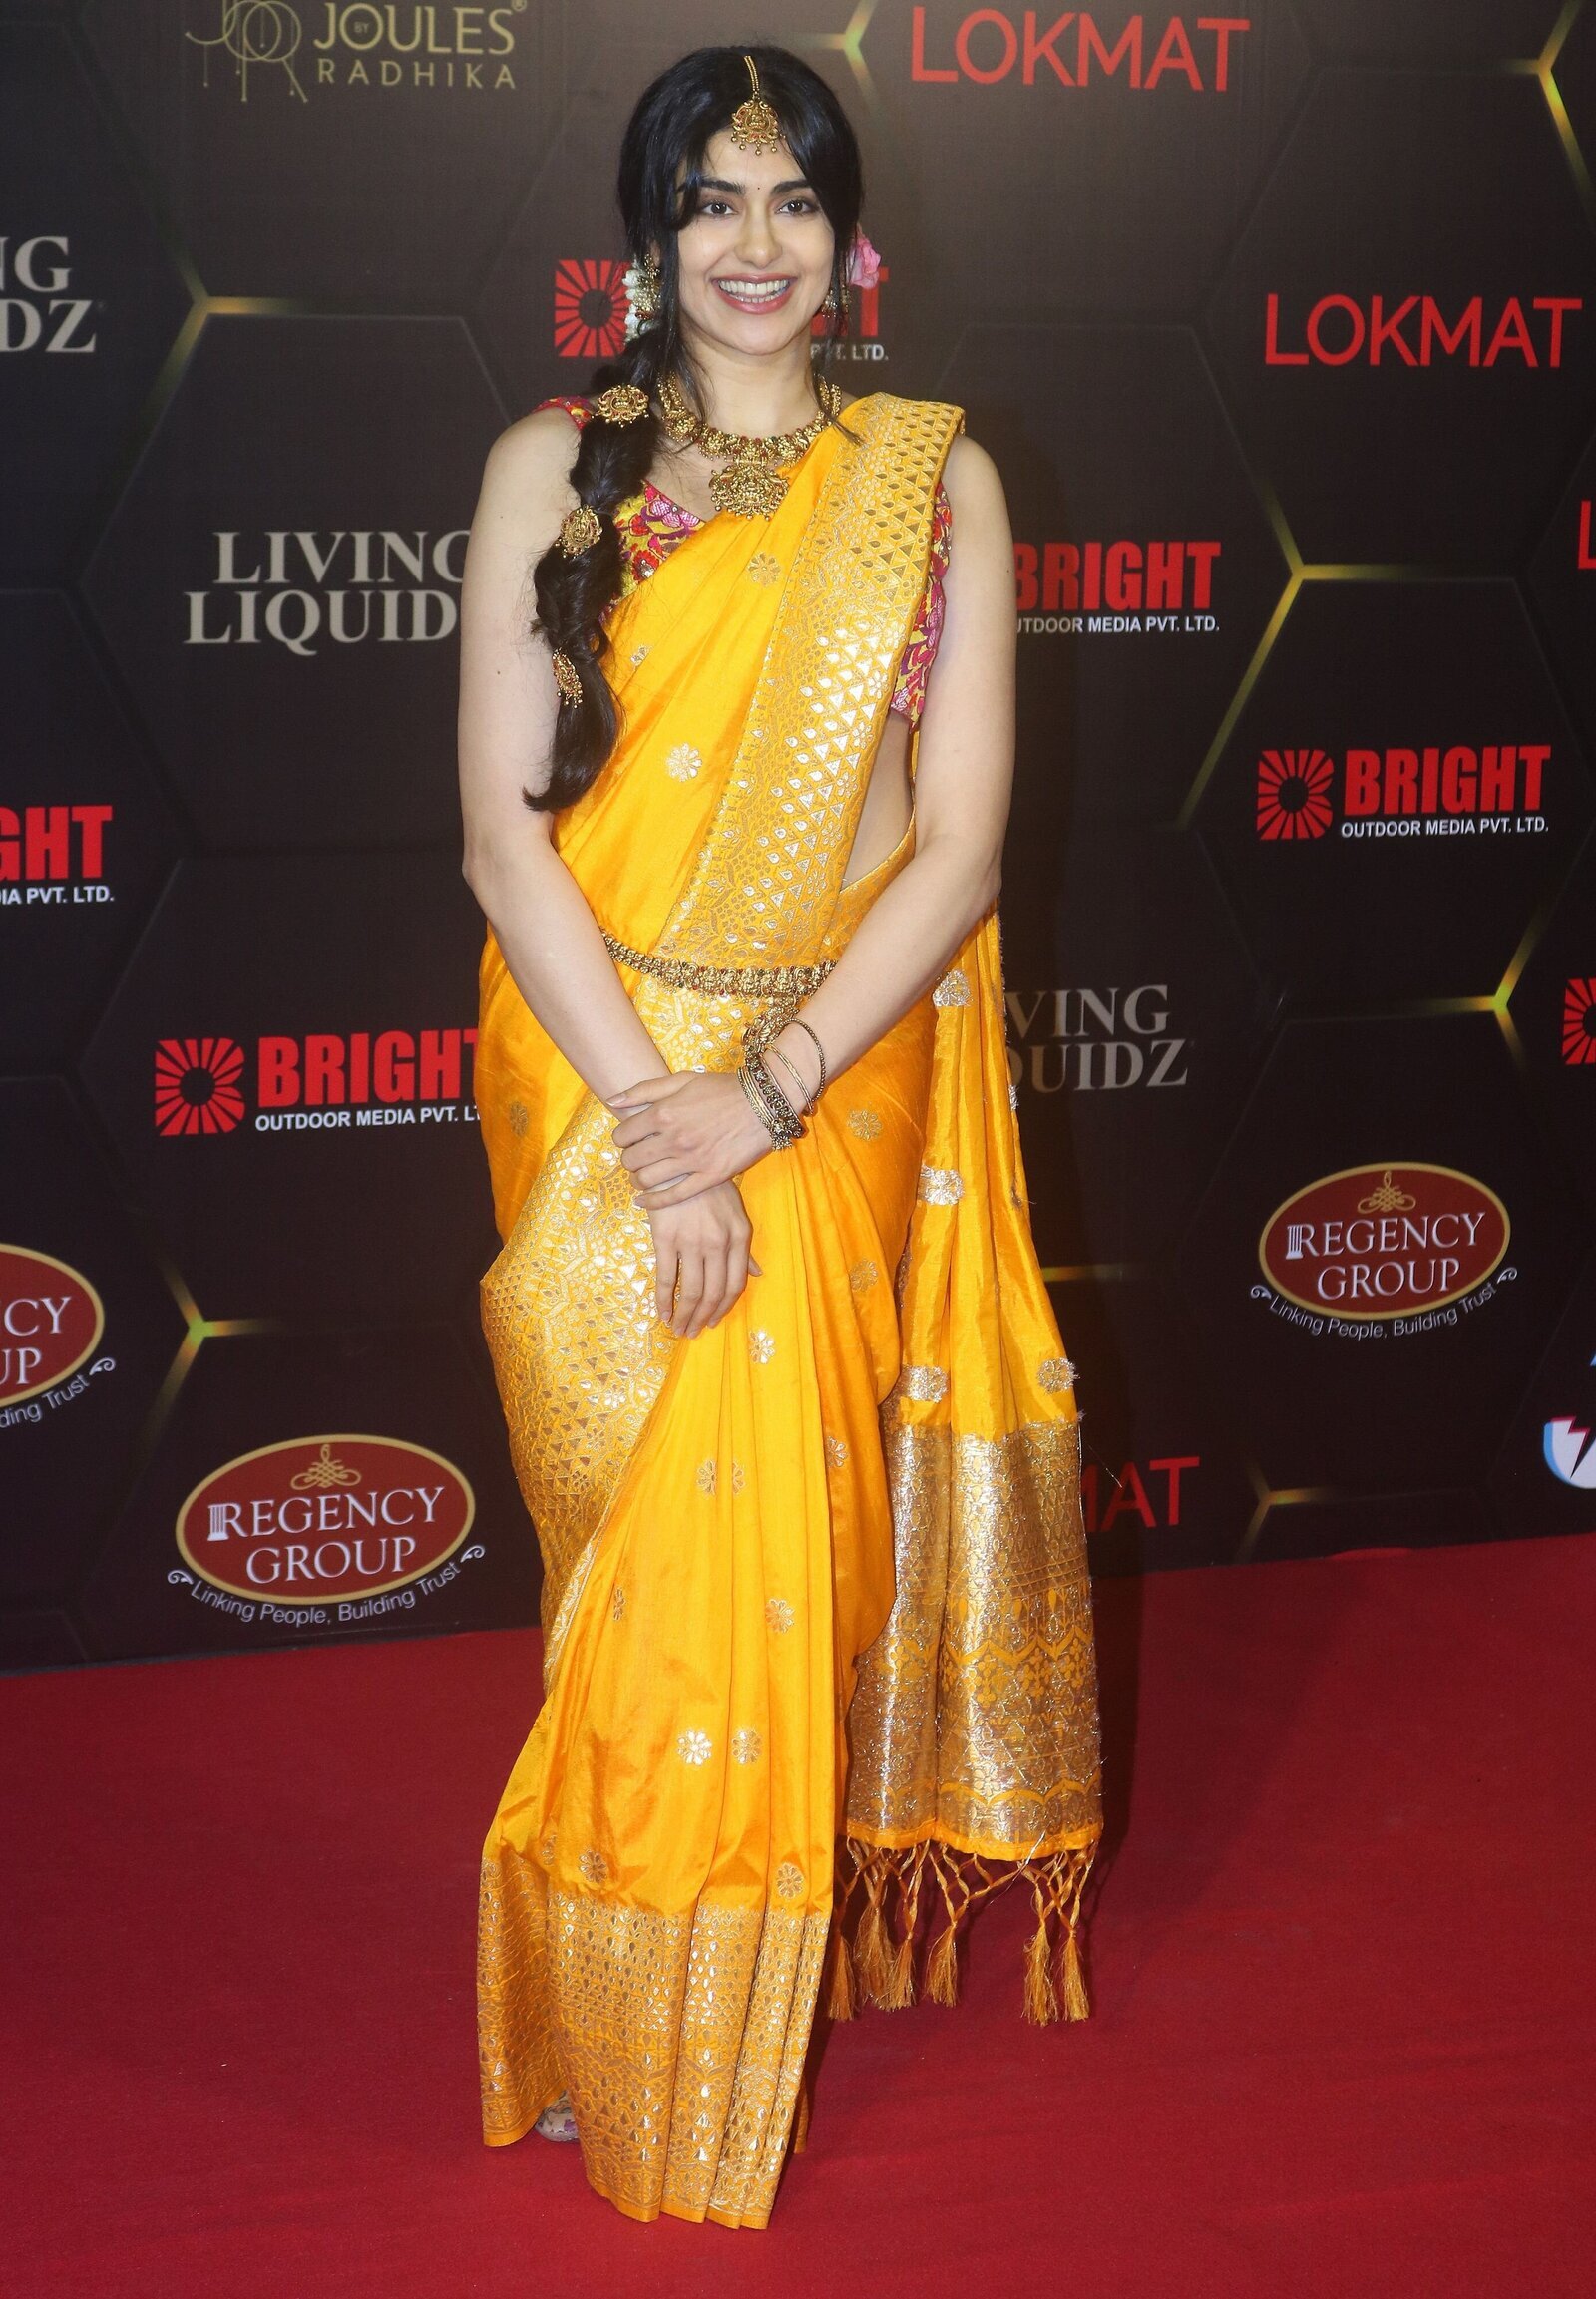 Adah Sharma - Photos: Celebs At The Lokmat Most Stylish Awards 2021 | Picture 1845761